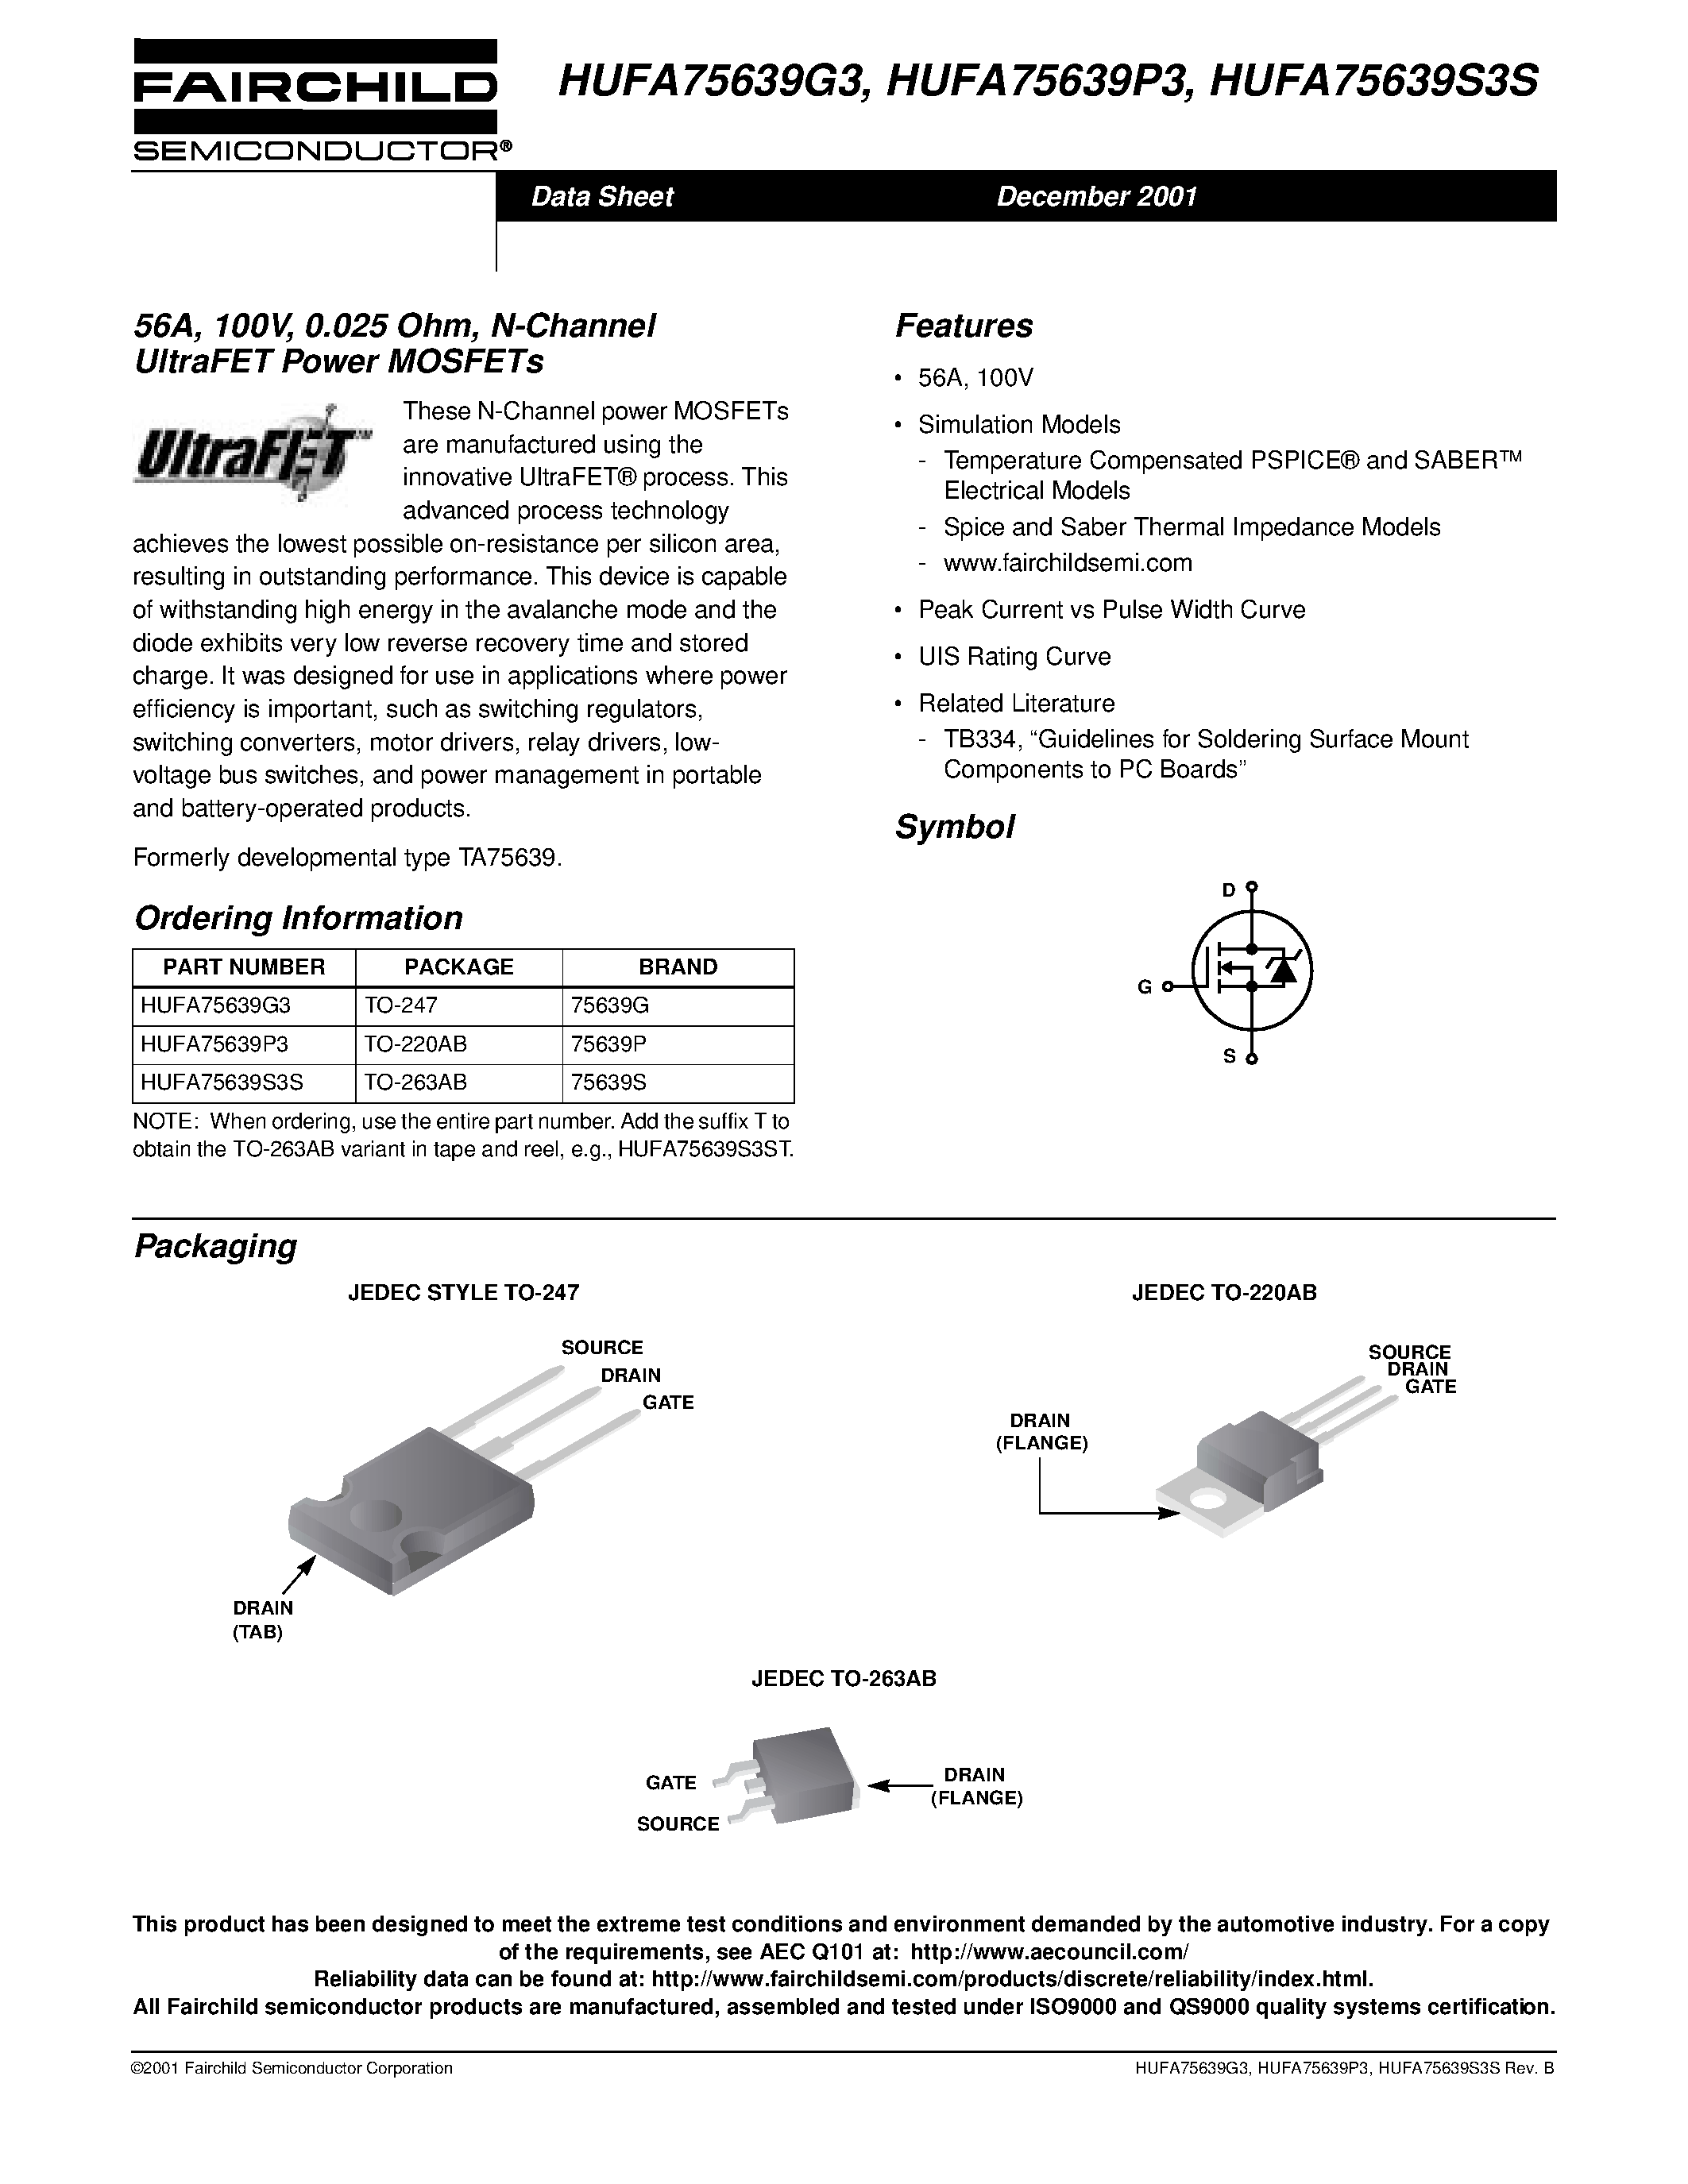 Даташит HUFA75639P3 - 56A/ 100V/ 0.025 Ohm/ N-Channel UltraFET Power MOSFETs страница 1